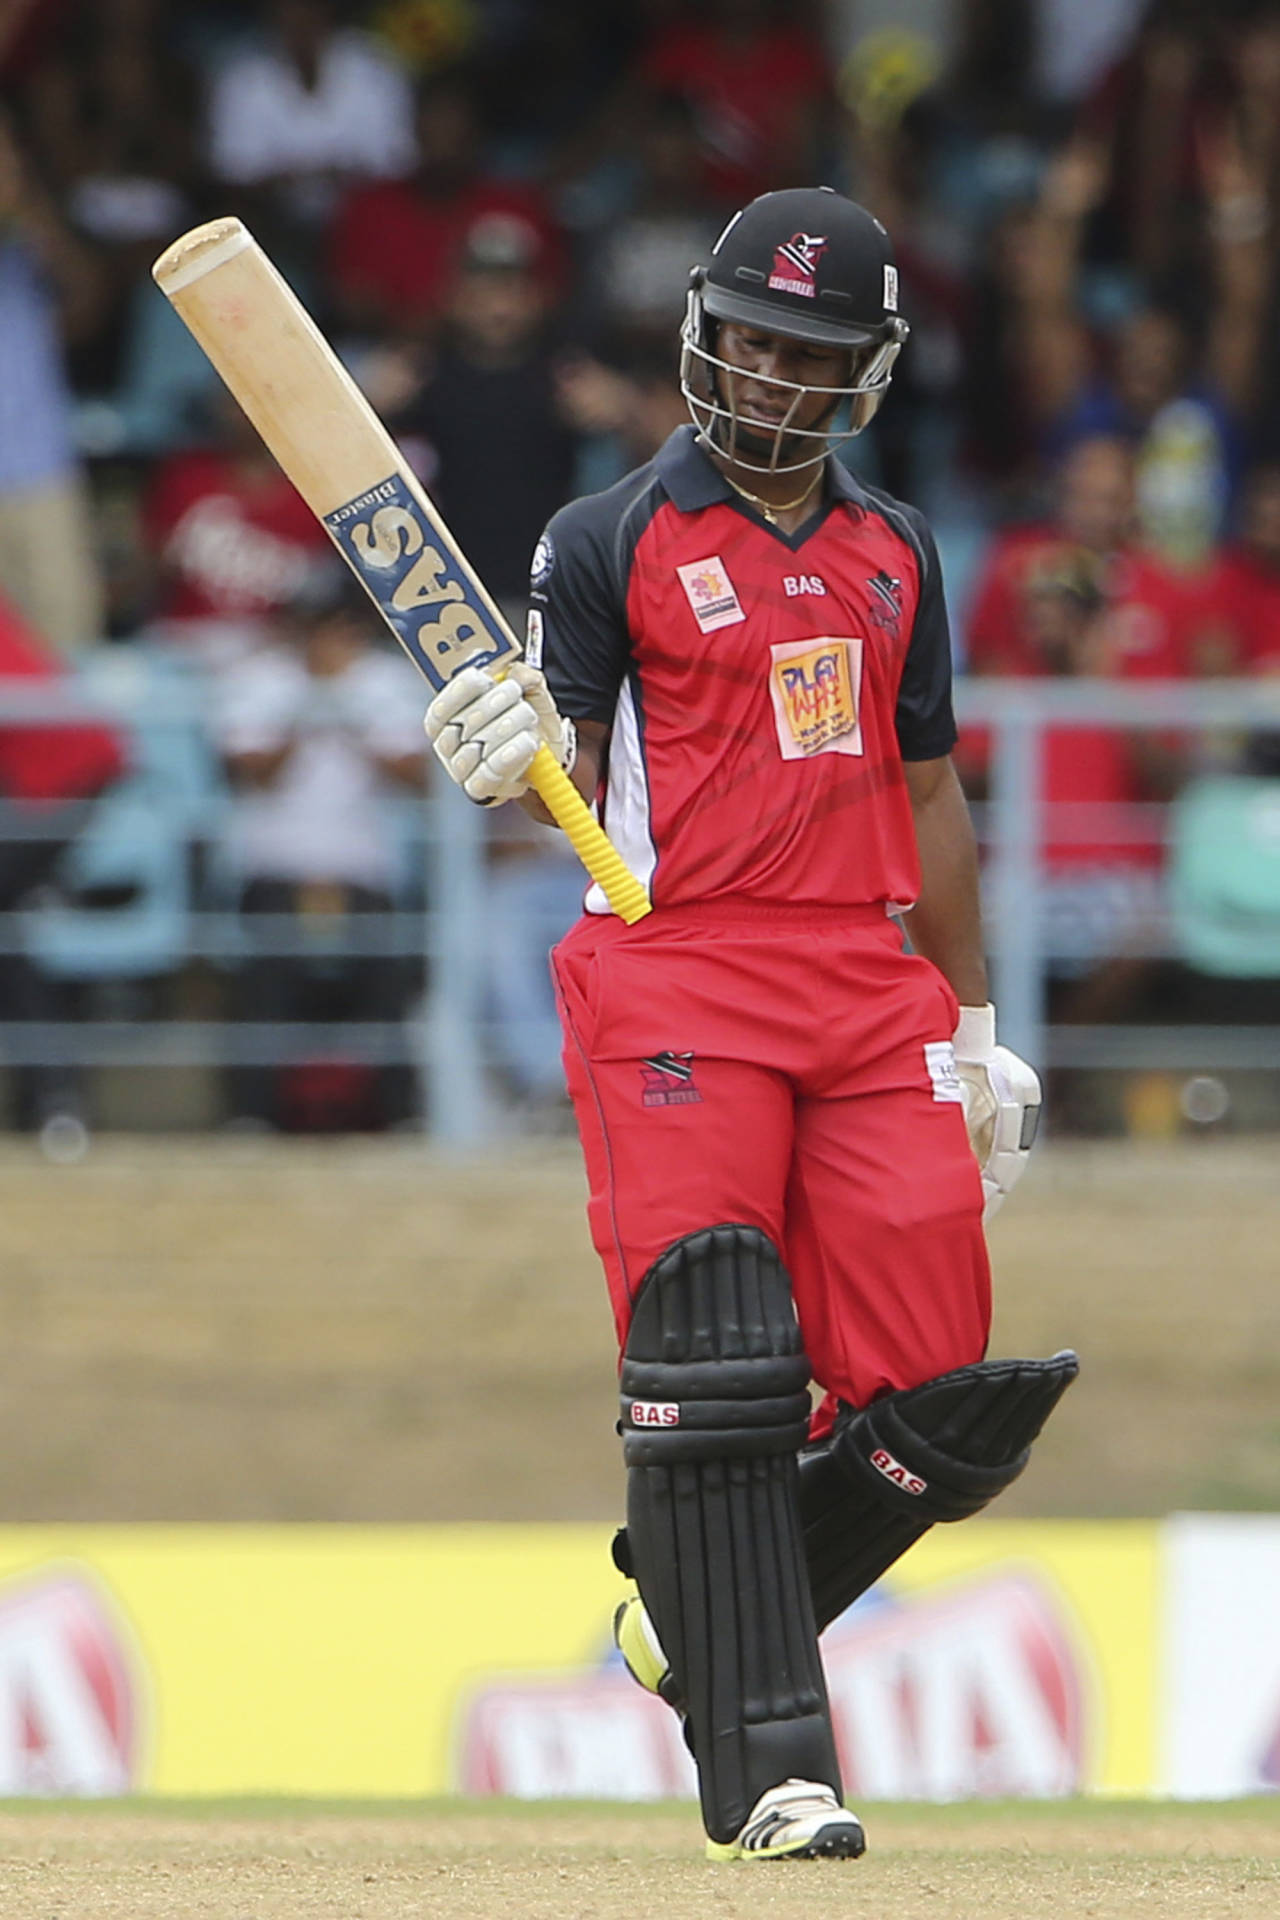 Evin Lewis acknowledges the crowd after reaching 50 off 36 balls, Trinidad & Tobago Red Steel v Jamaica Tallawahs, CPL 2014, Port of Spain, July 26, 2014